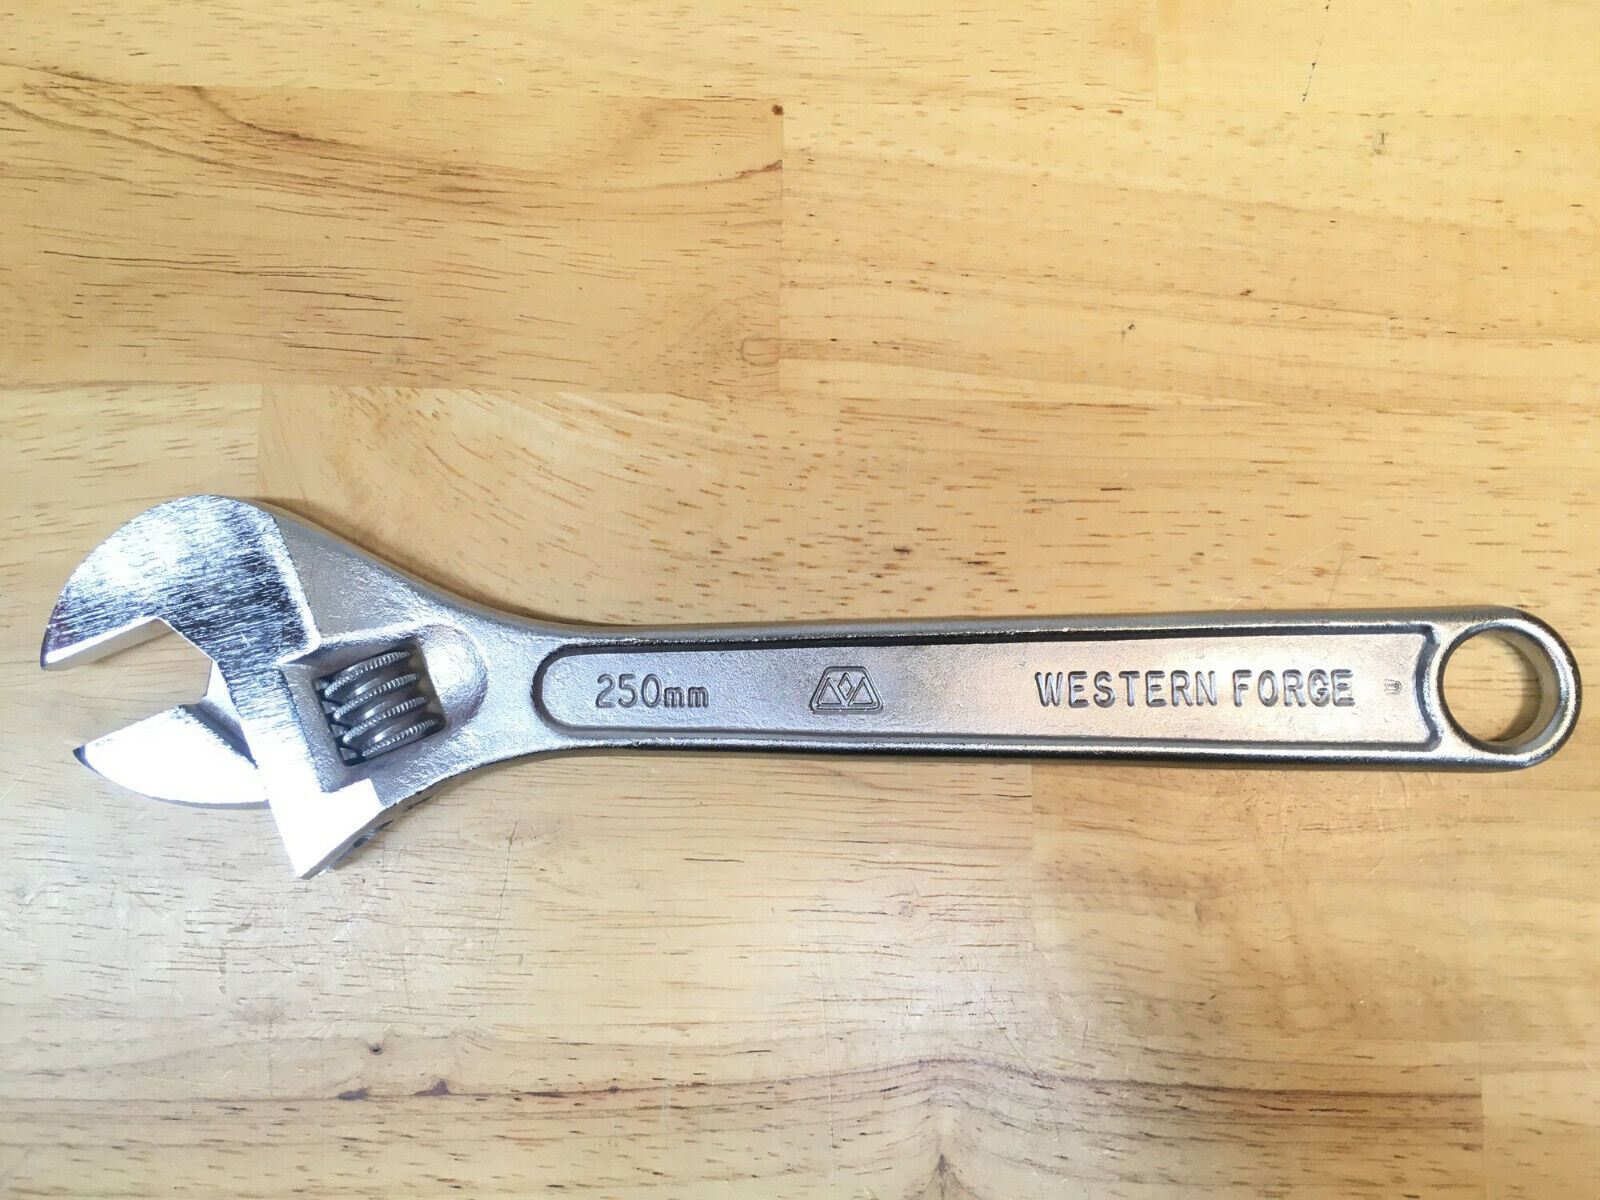 New Old Stock Western Forge 10in Adjustable Wrench Crescent Style 250mm Usa 5210